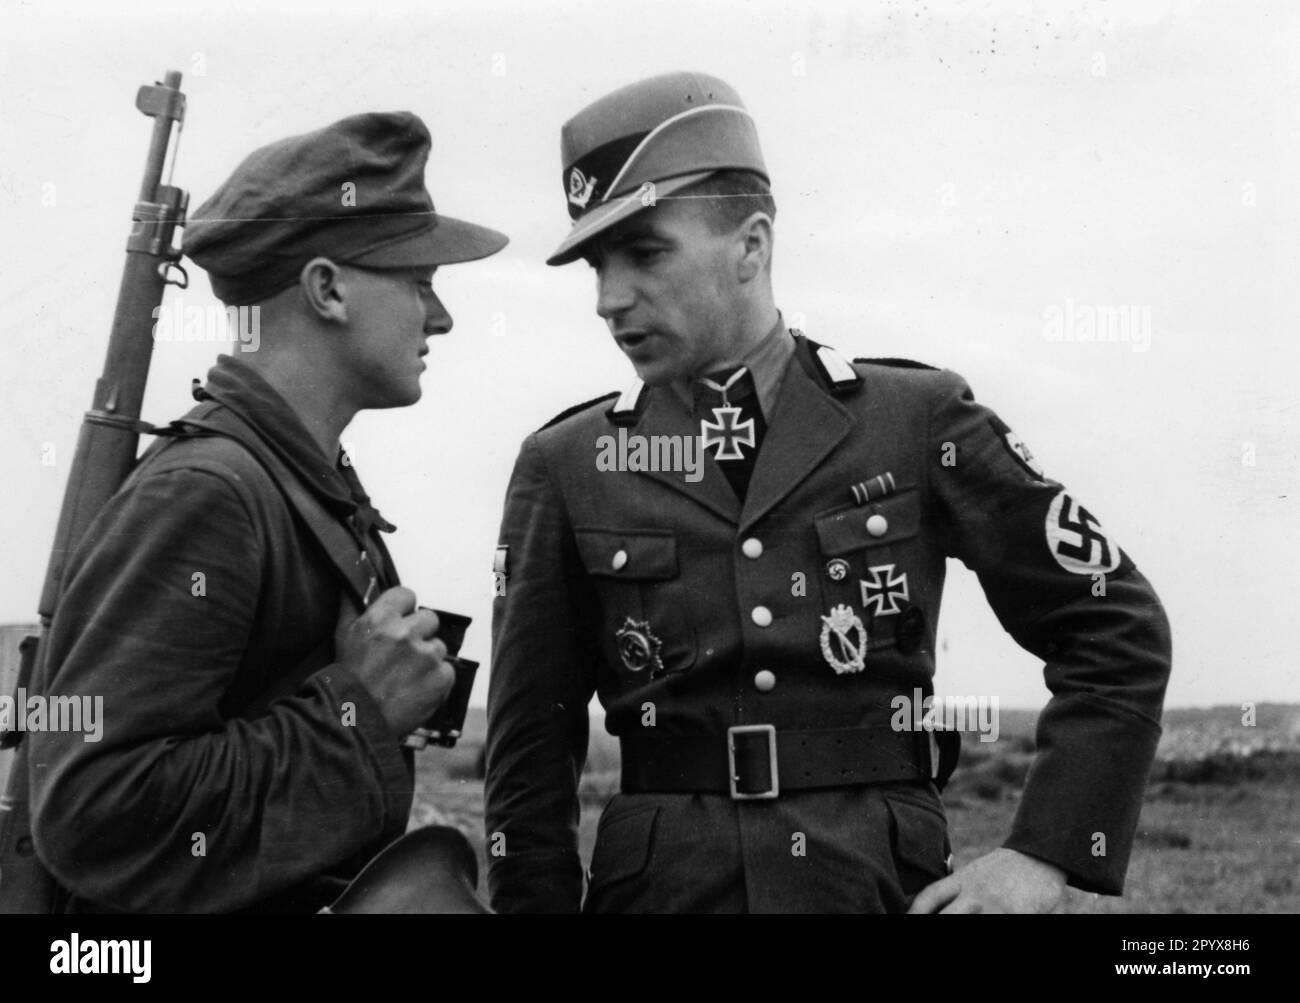 A highly decorated officer (Oberstfeldmeister / Hauptmann) of the Reich Labor Service talks to a member of the RAD assigned to guard duty during a visit to the Atlantic Wall. In addition to the Knight's Cross, he is decorated with the German Cross in Gold, the Infantry Storm Badge and the Iron Cross I. Class. Under the right pocket flap he wears the party badge of the NSDAP. Photo: Creten [automated translation] Stock Photo